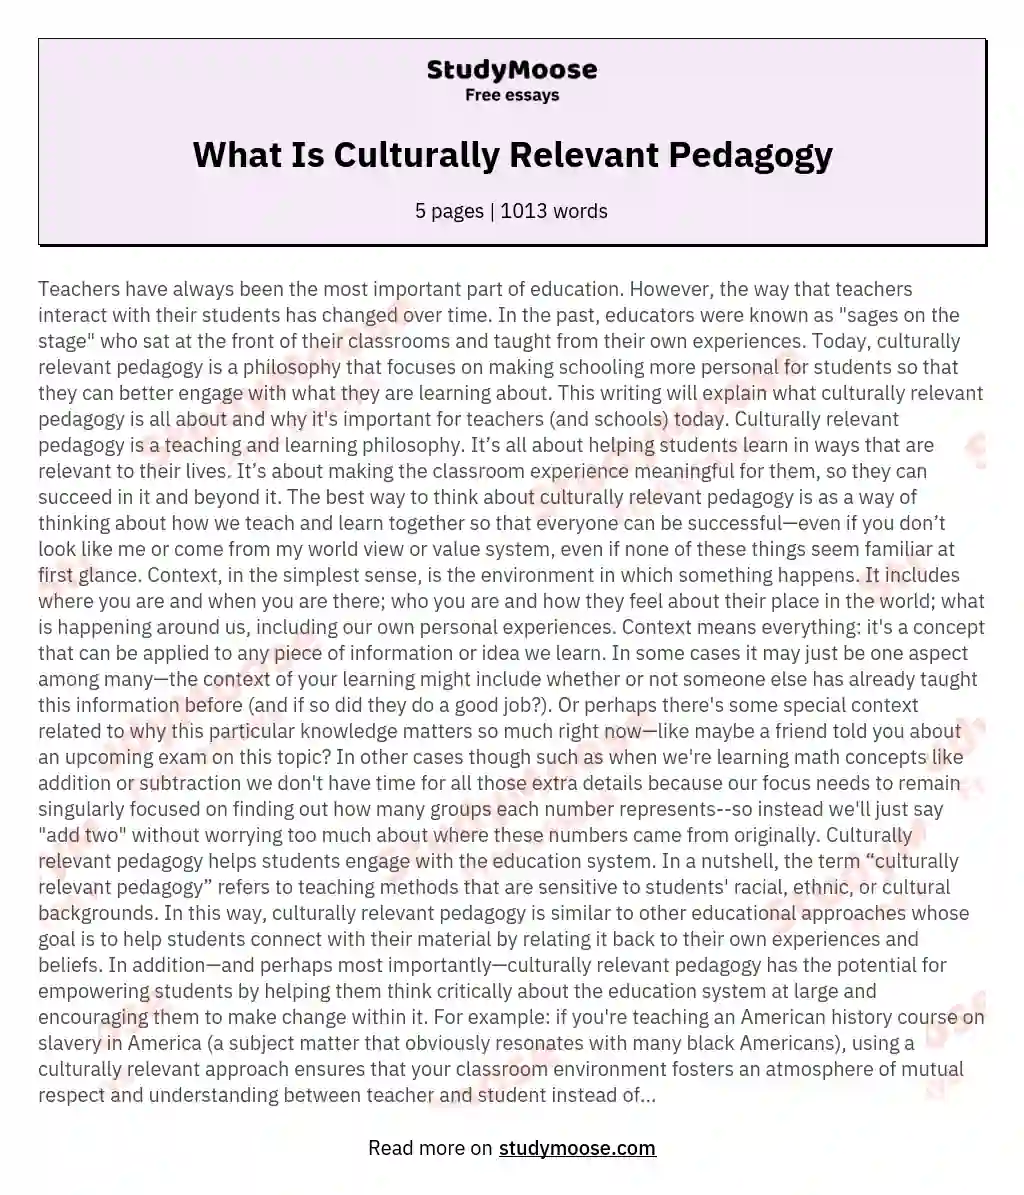 What Is Culturally Relevant Pedagogy essay